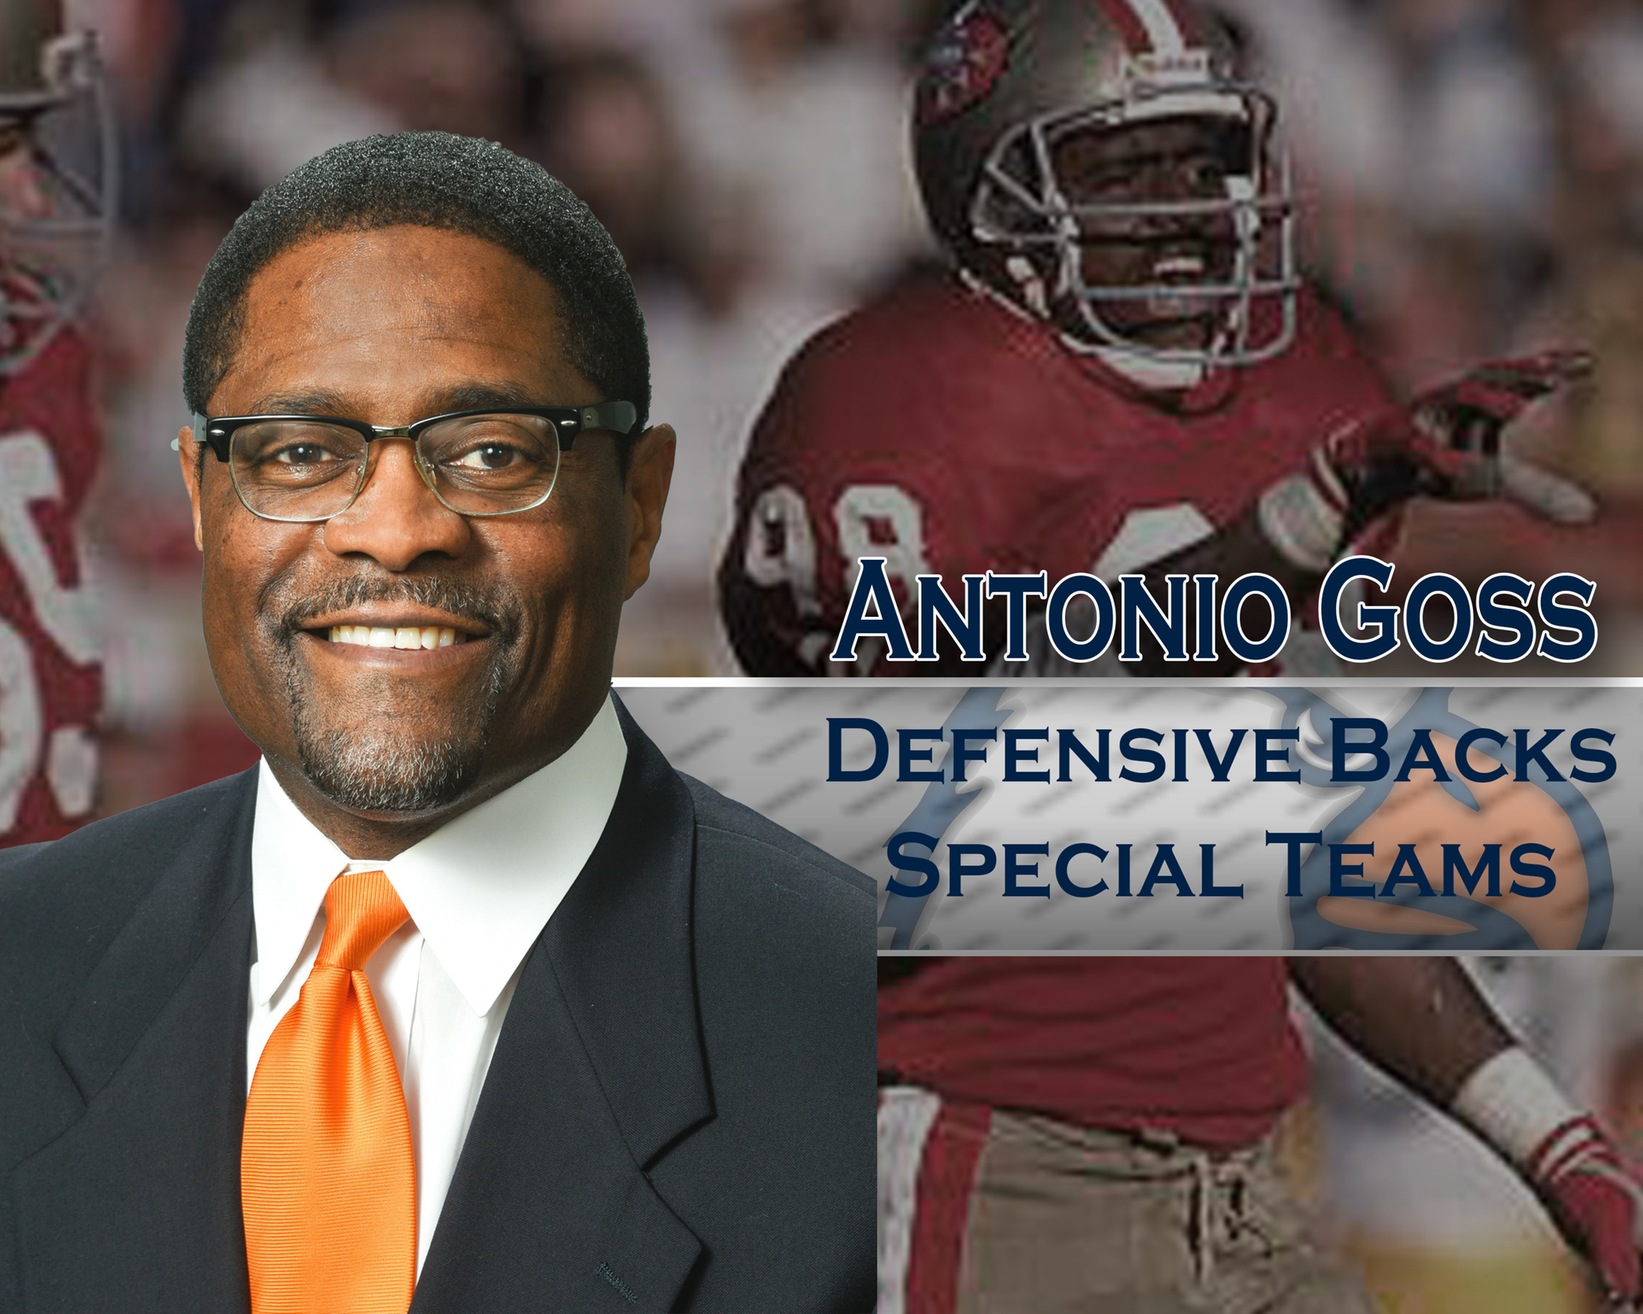 Turner announces Goss as new defensive backs and special teams coach